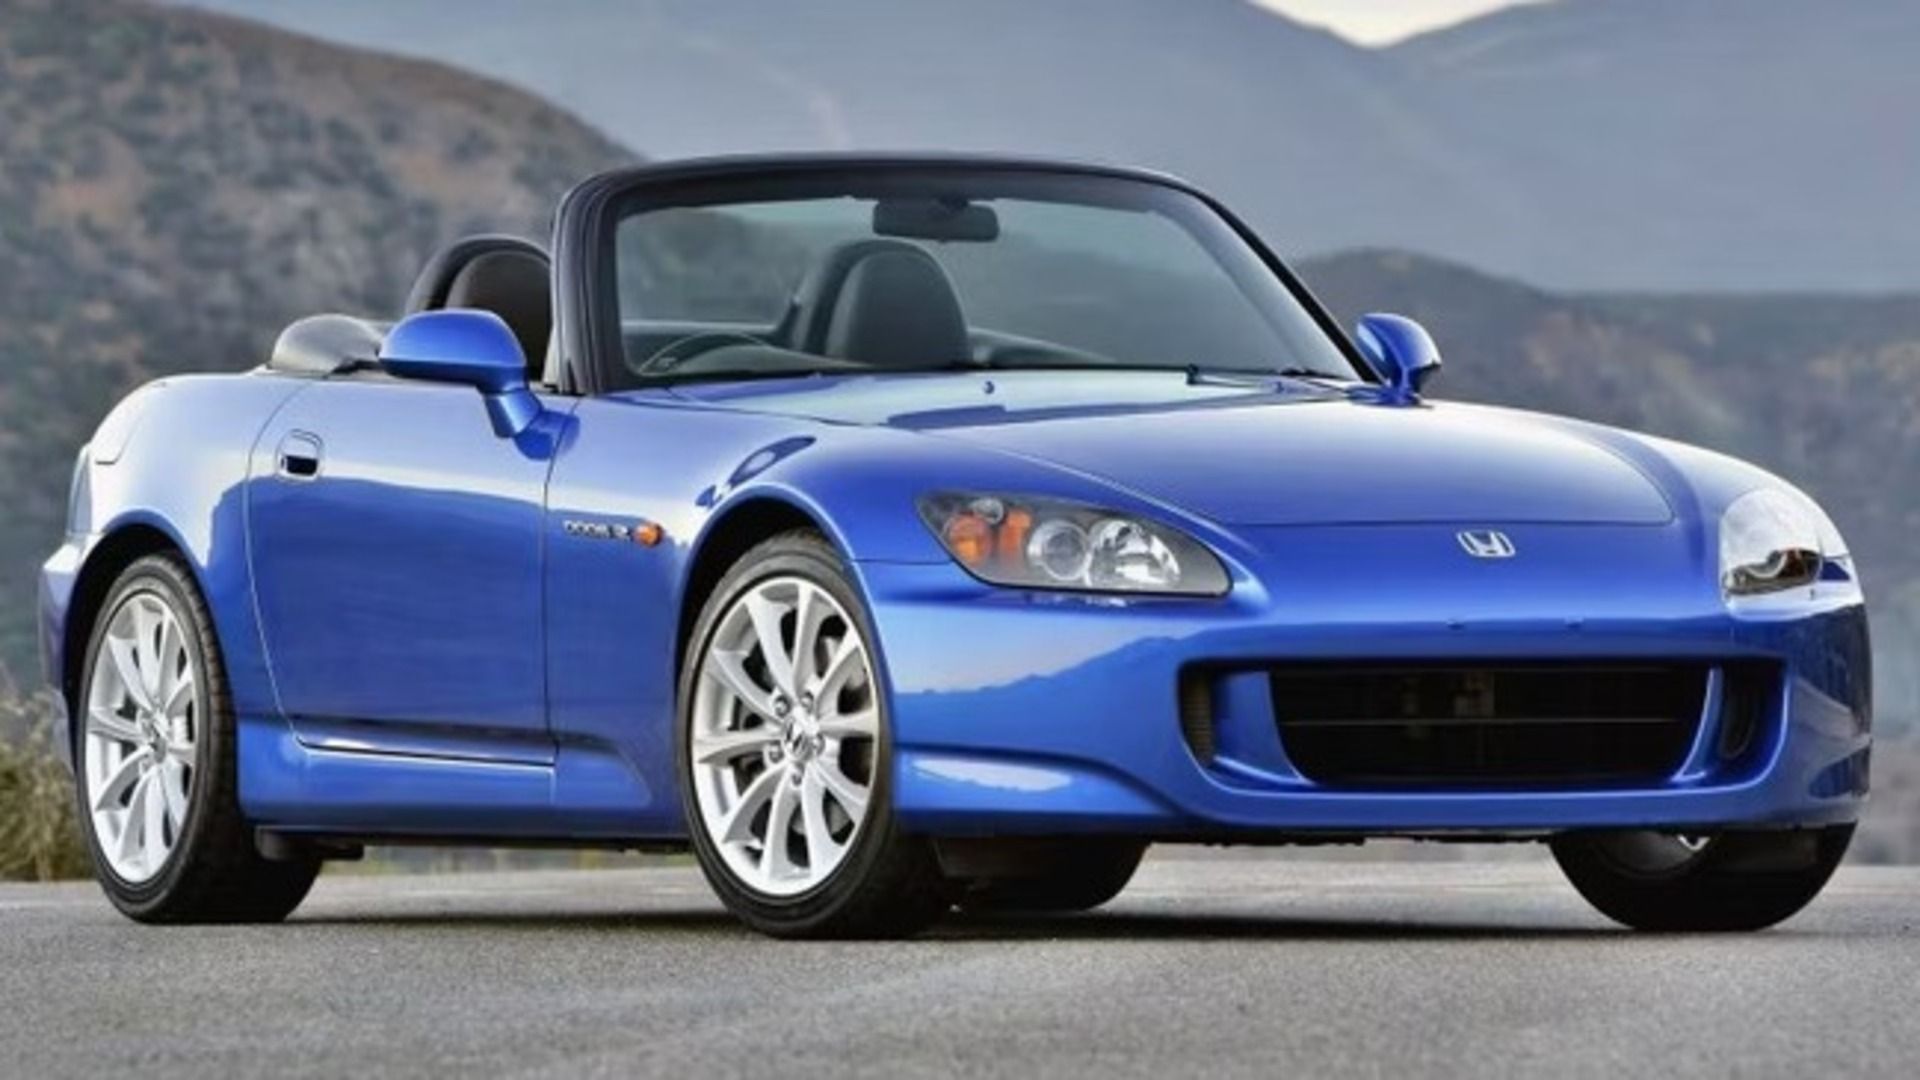 Honda S2000 AP1 finished in Blue stopped on a road infront of mountains.